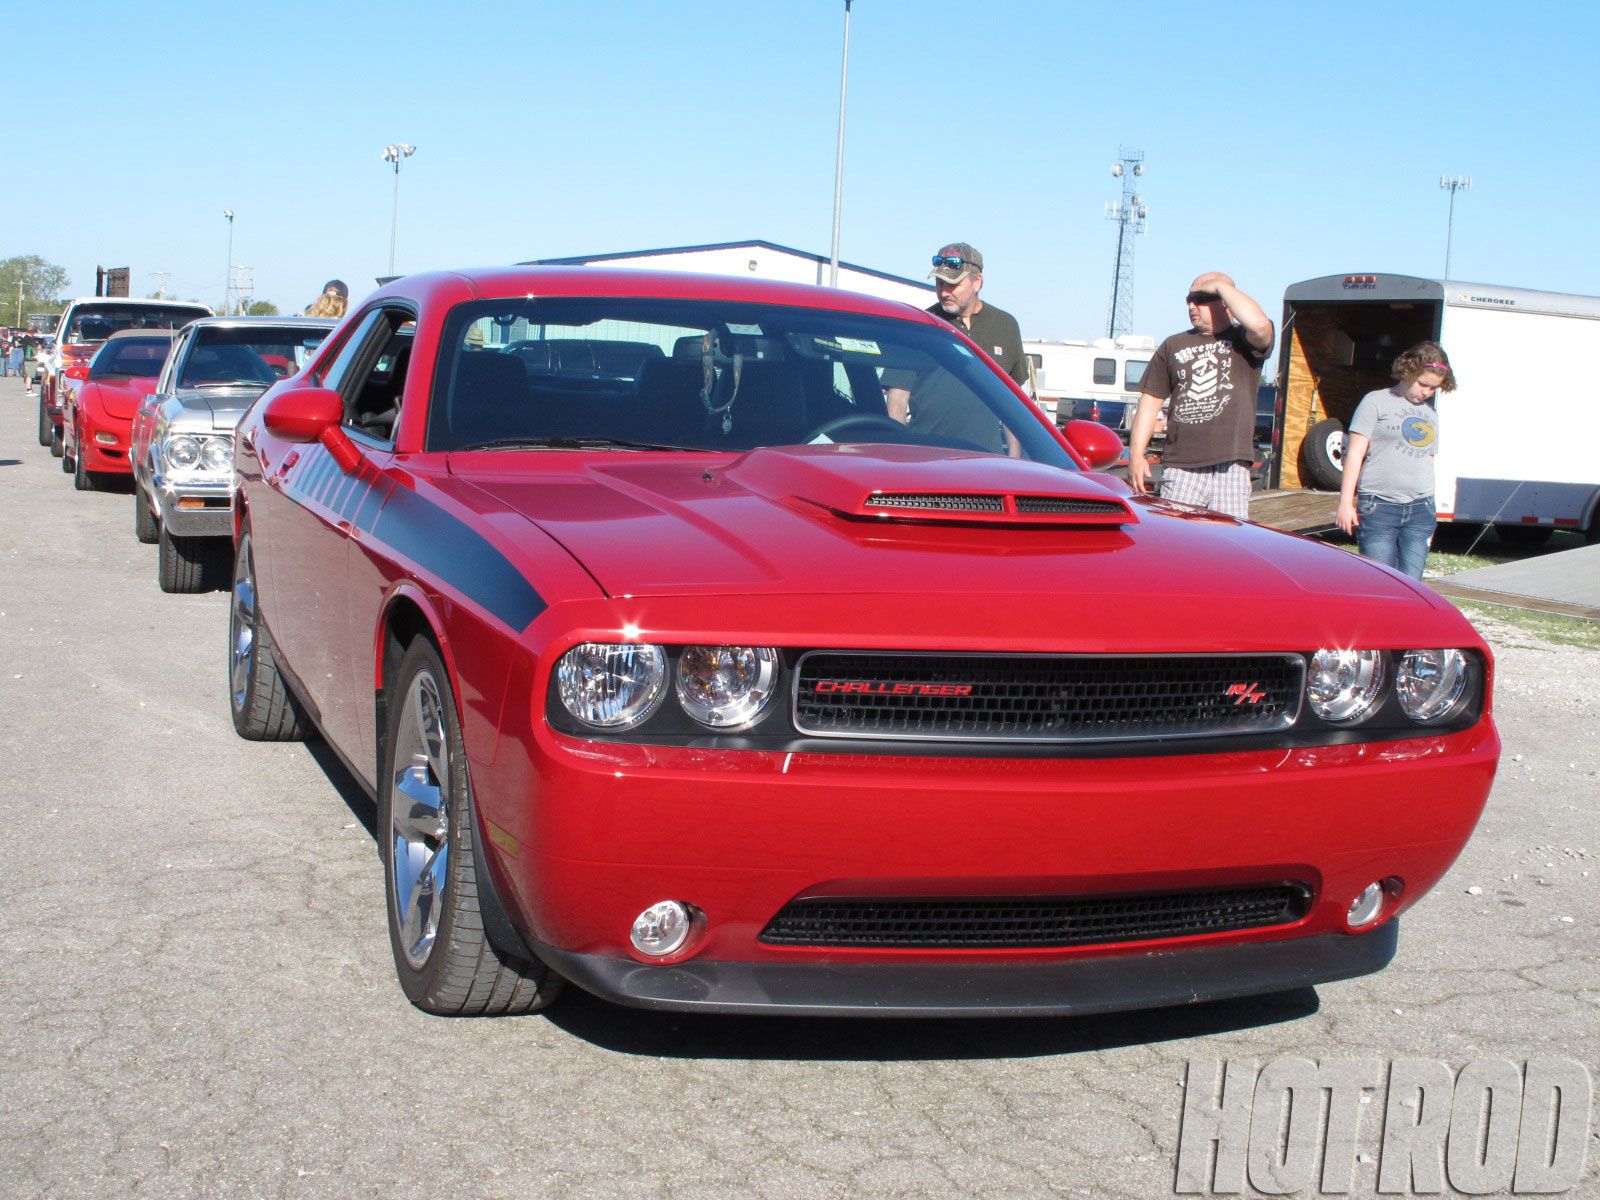 Attached picture 7475480-hrdp-1209w-2012-drag-week-tech-day-1185.jpg